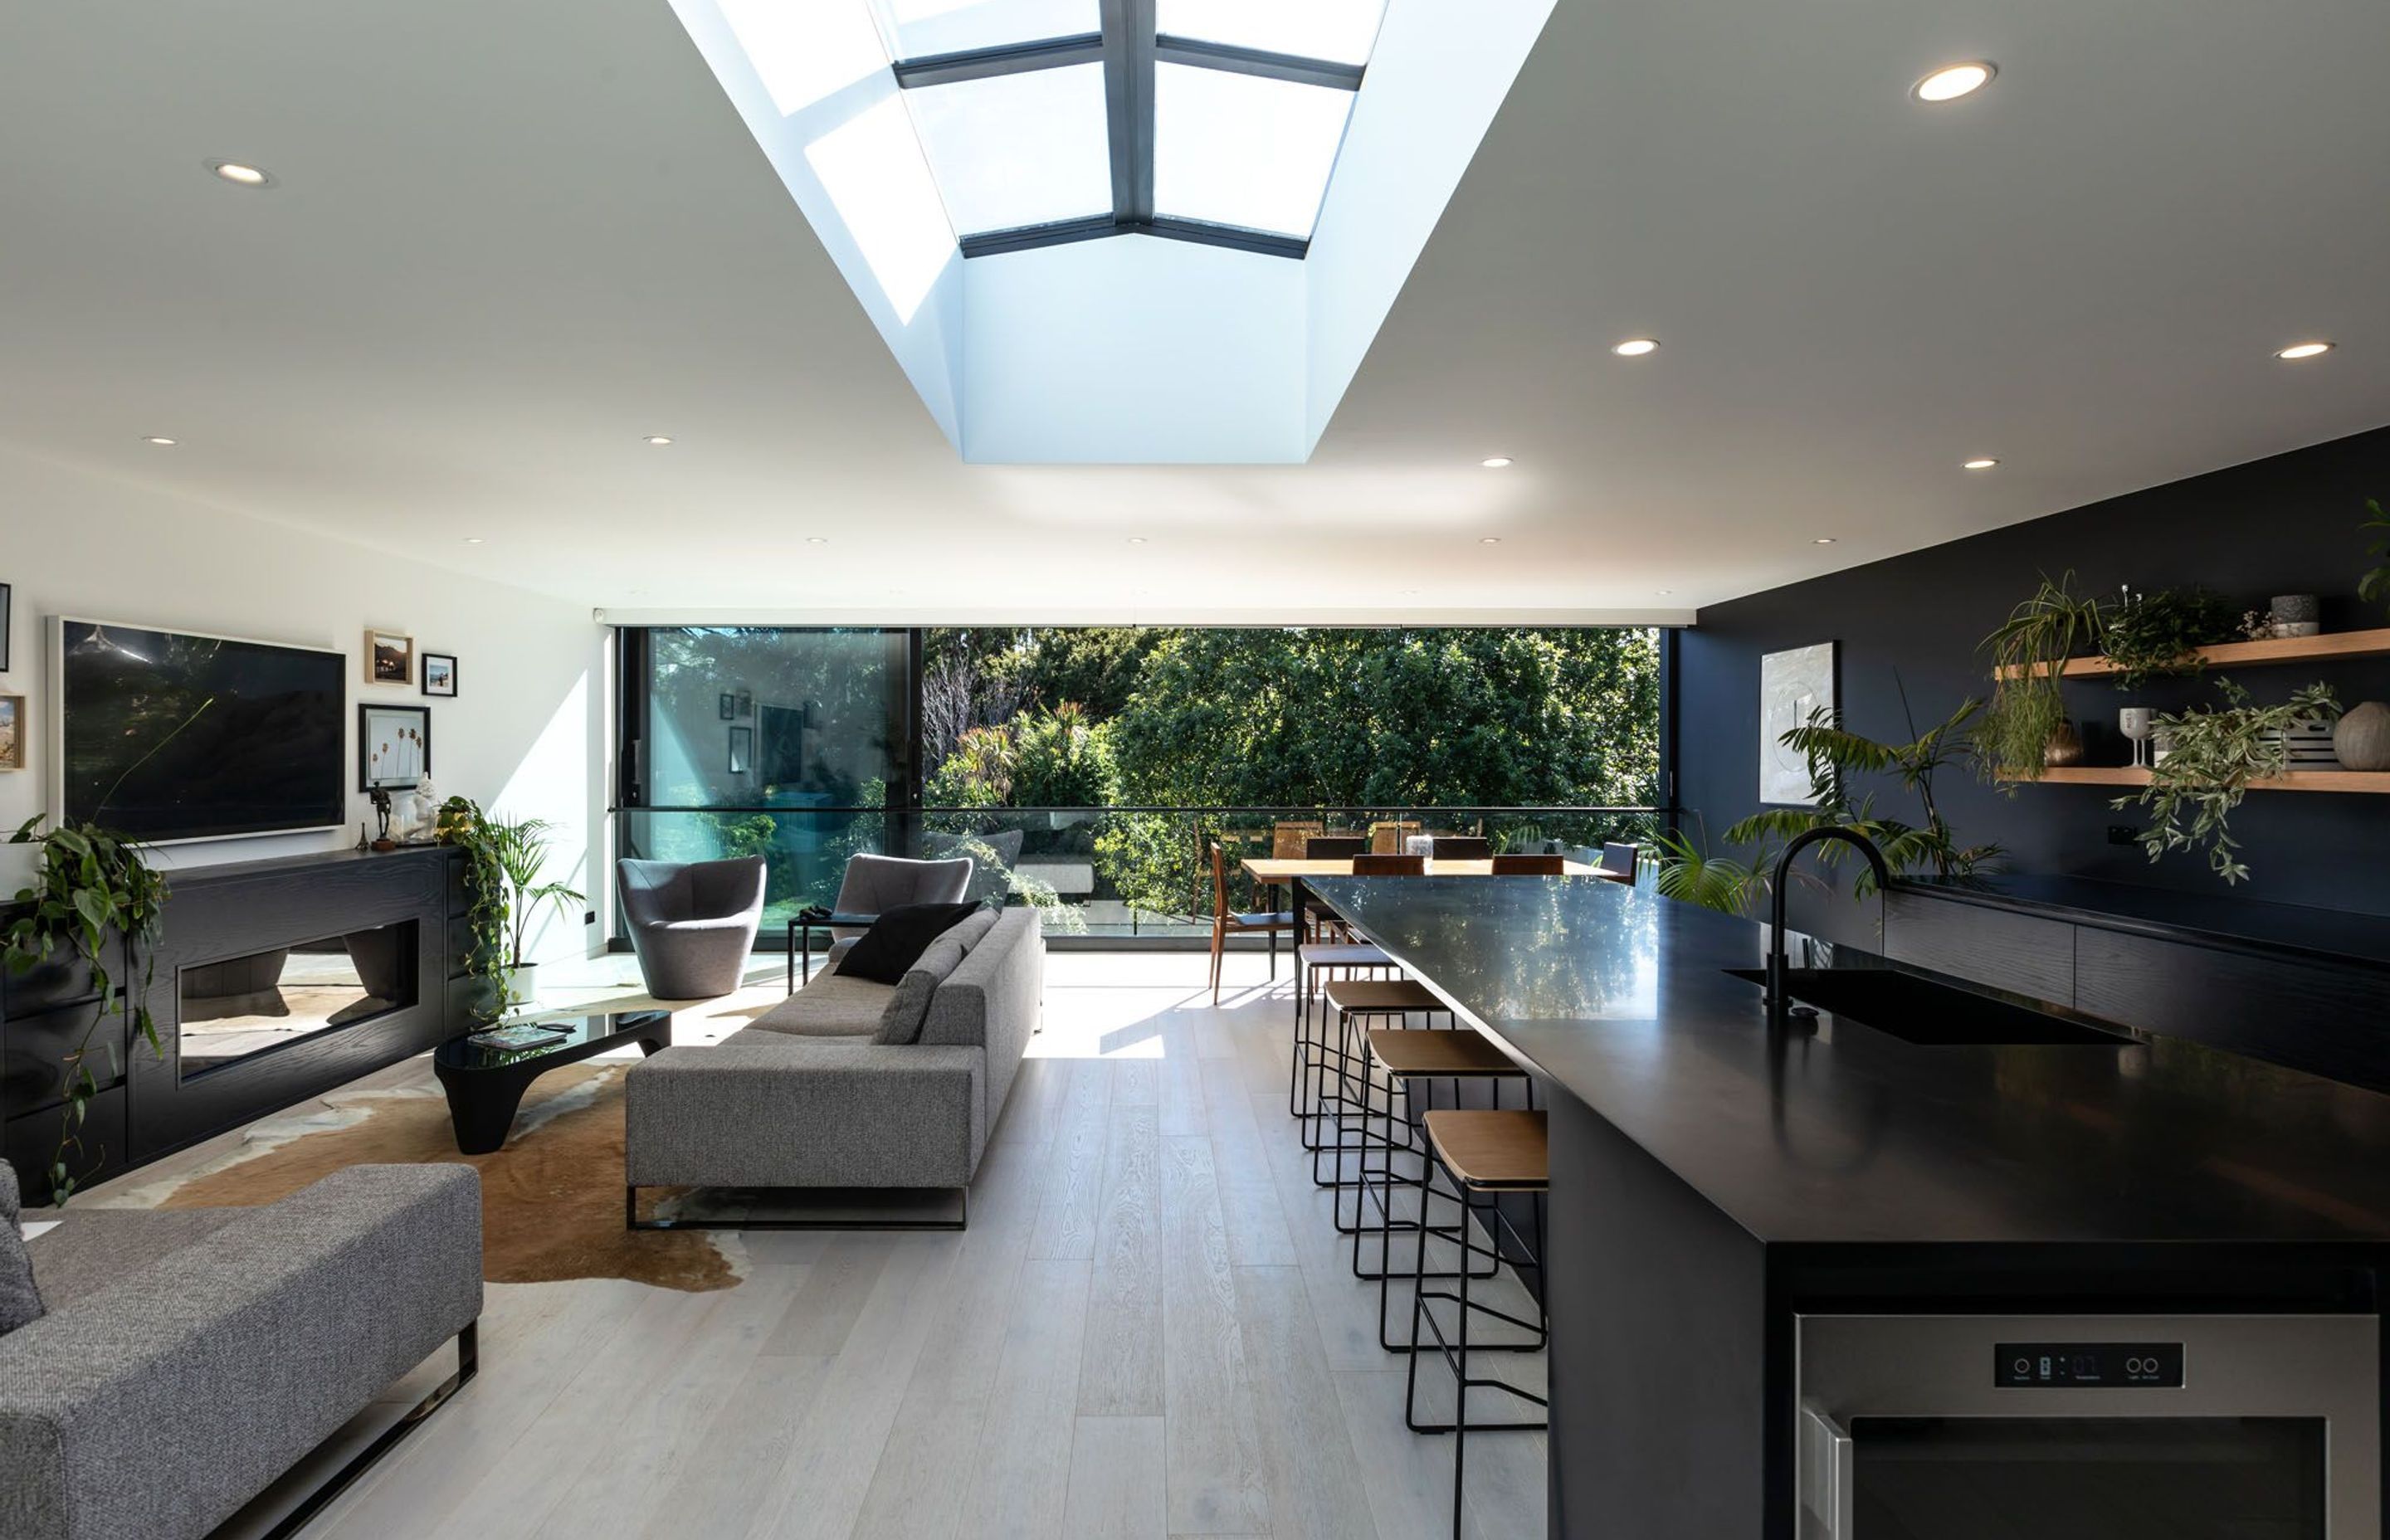 The open plan living area of the extension highlights the dichromatic colour scheme, punctuated with natural accents, to further reinforce the connection with nature through the sliding doors.